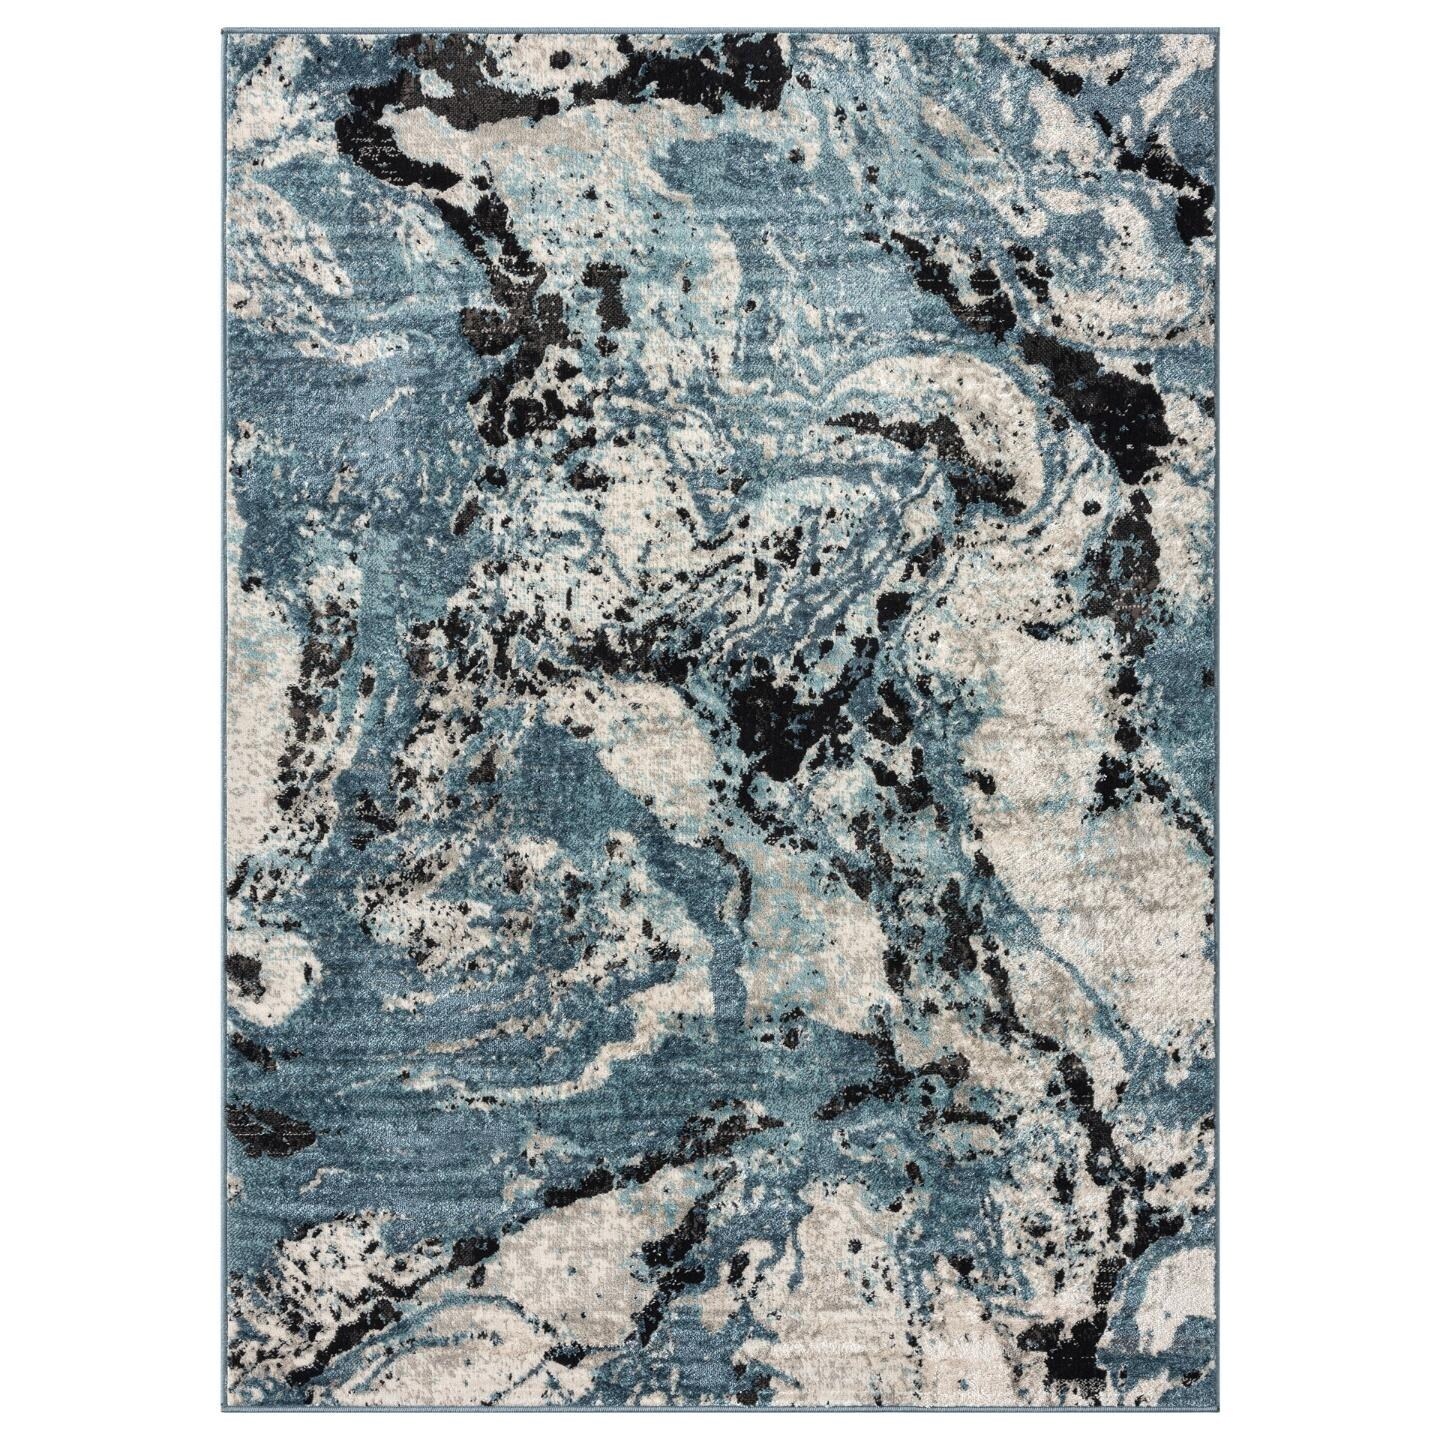 Luxe Weavers Marble Swirl Abstract Area Rug, Blue 5x7